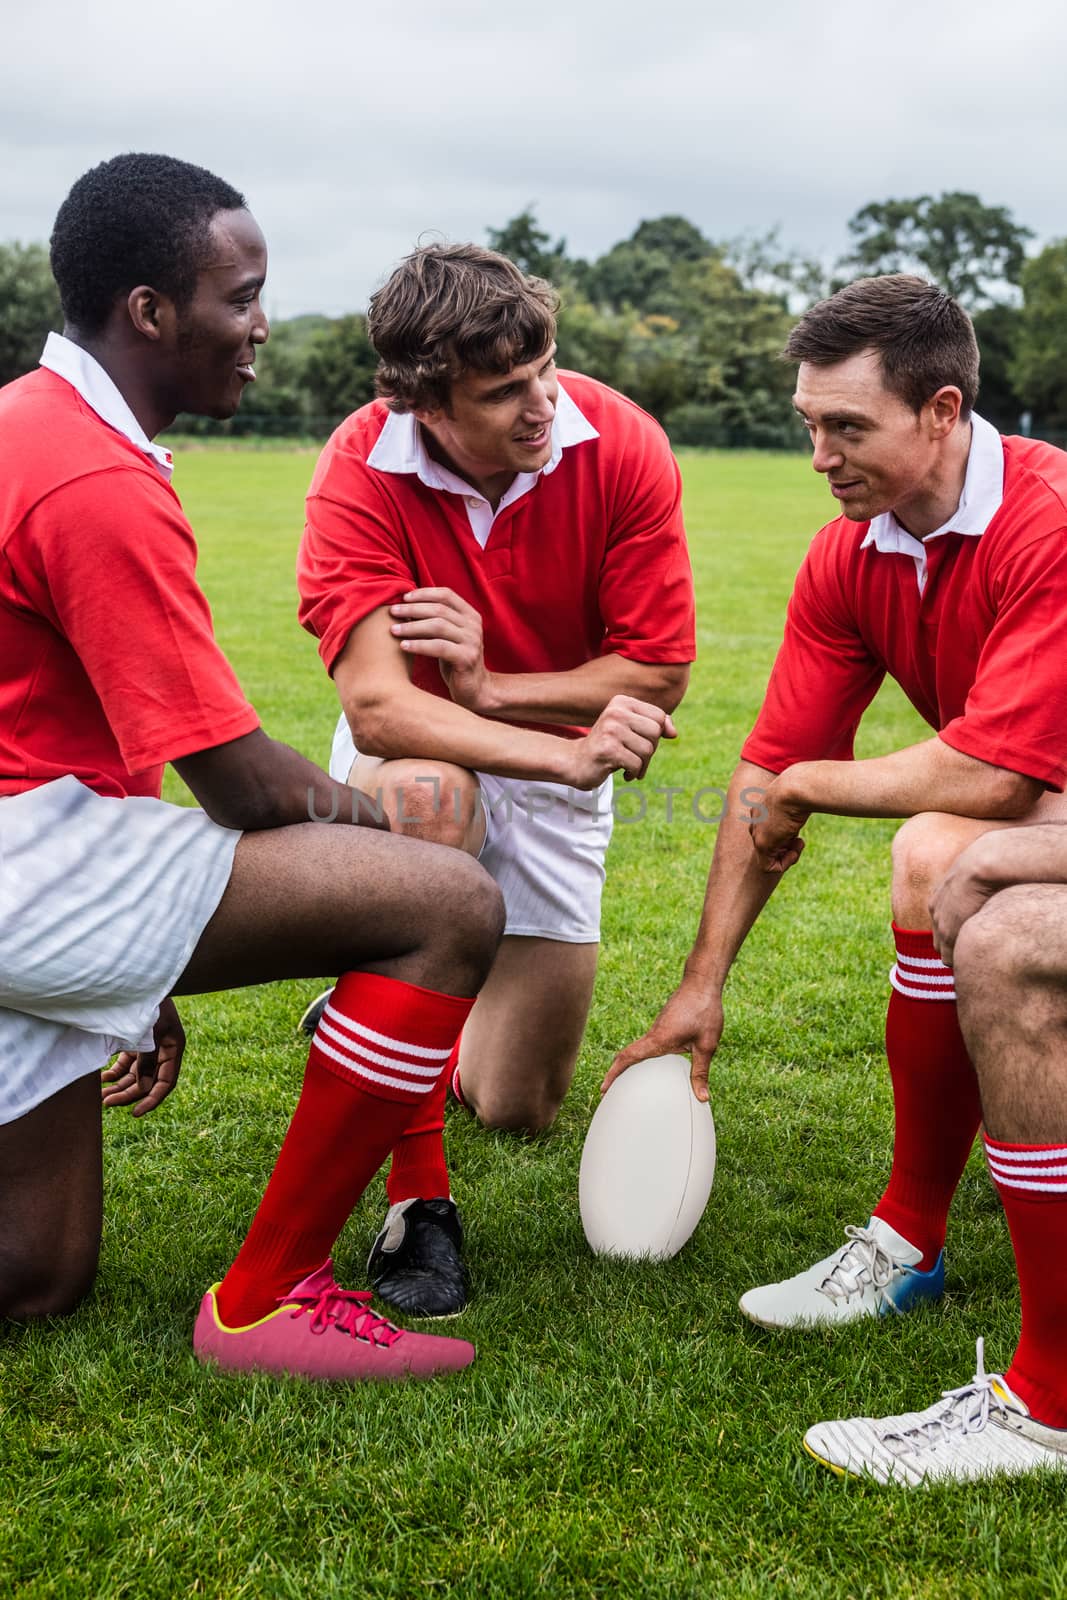 Rugby players discussing tactics before match by Wavebreakmedia